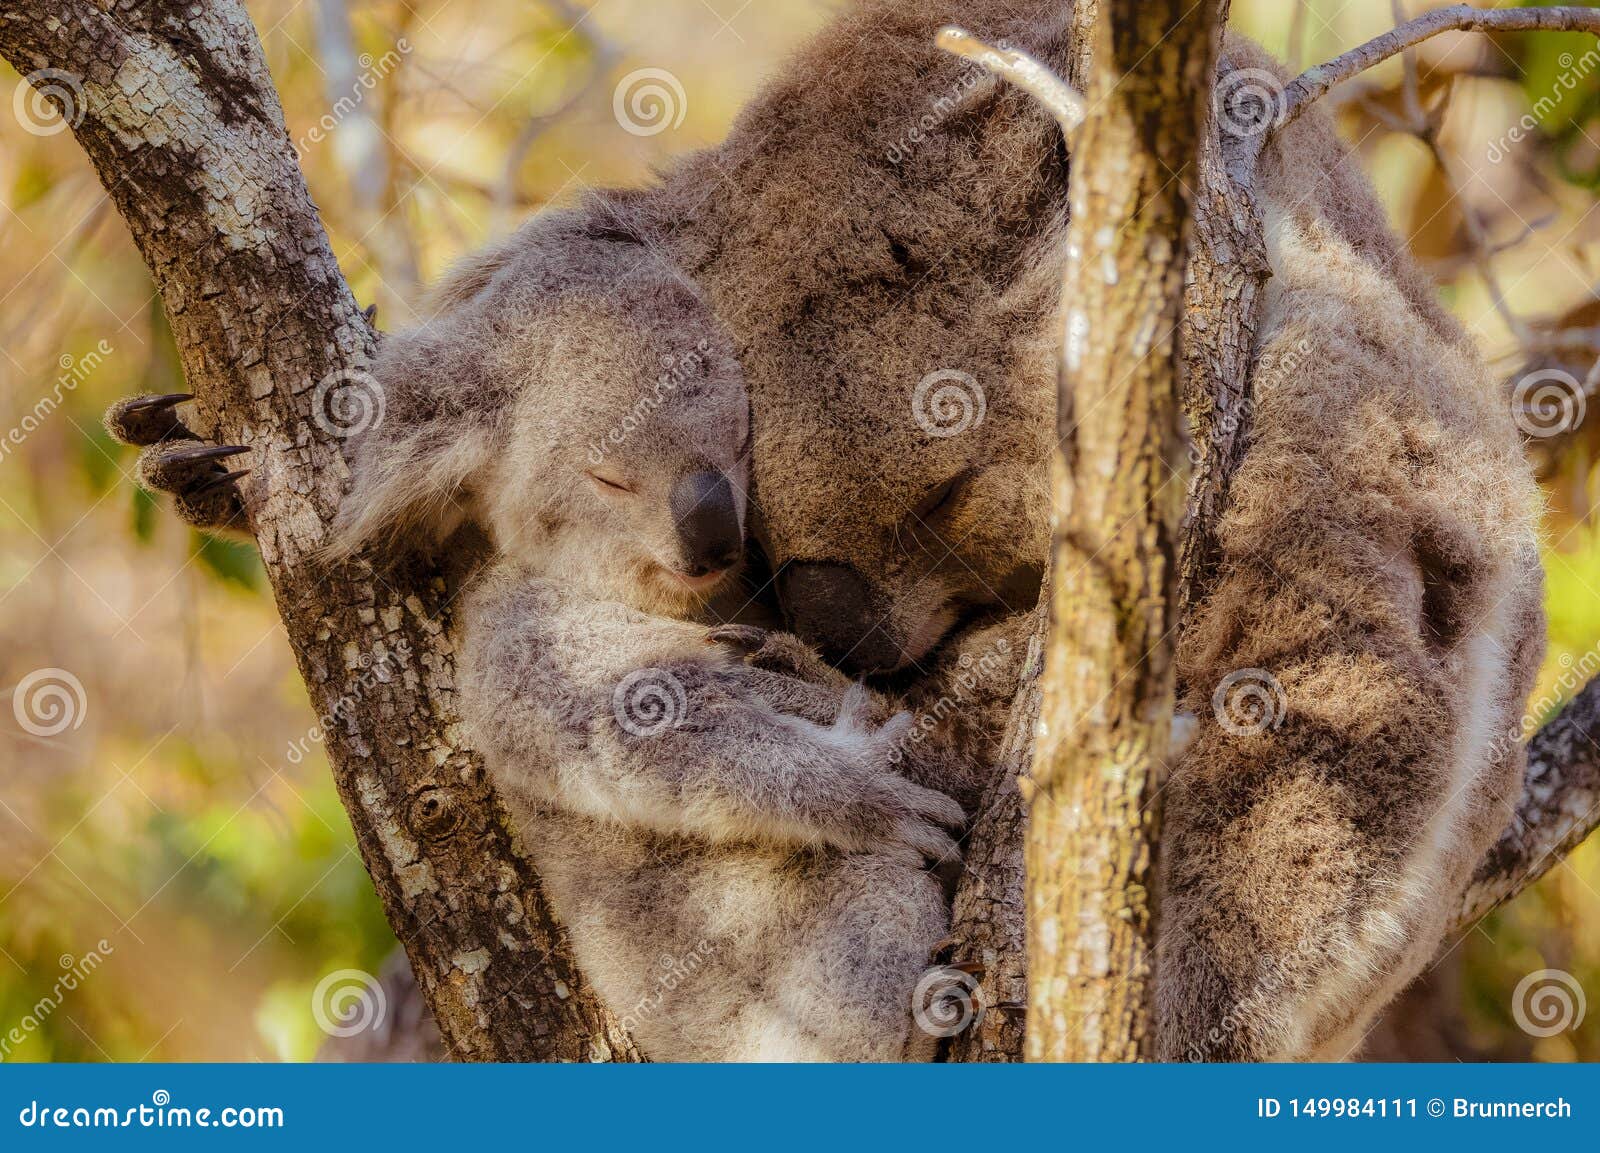 Koala Mother Carrying Joey On Her Back Royalty-Free Stock Photography ...